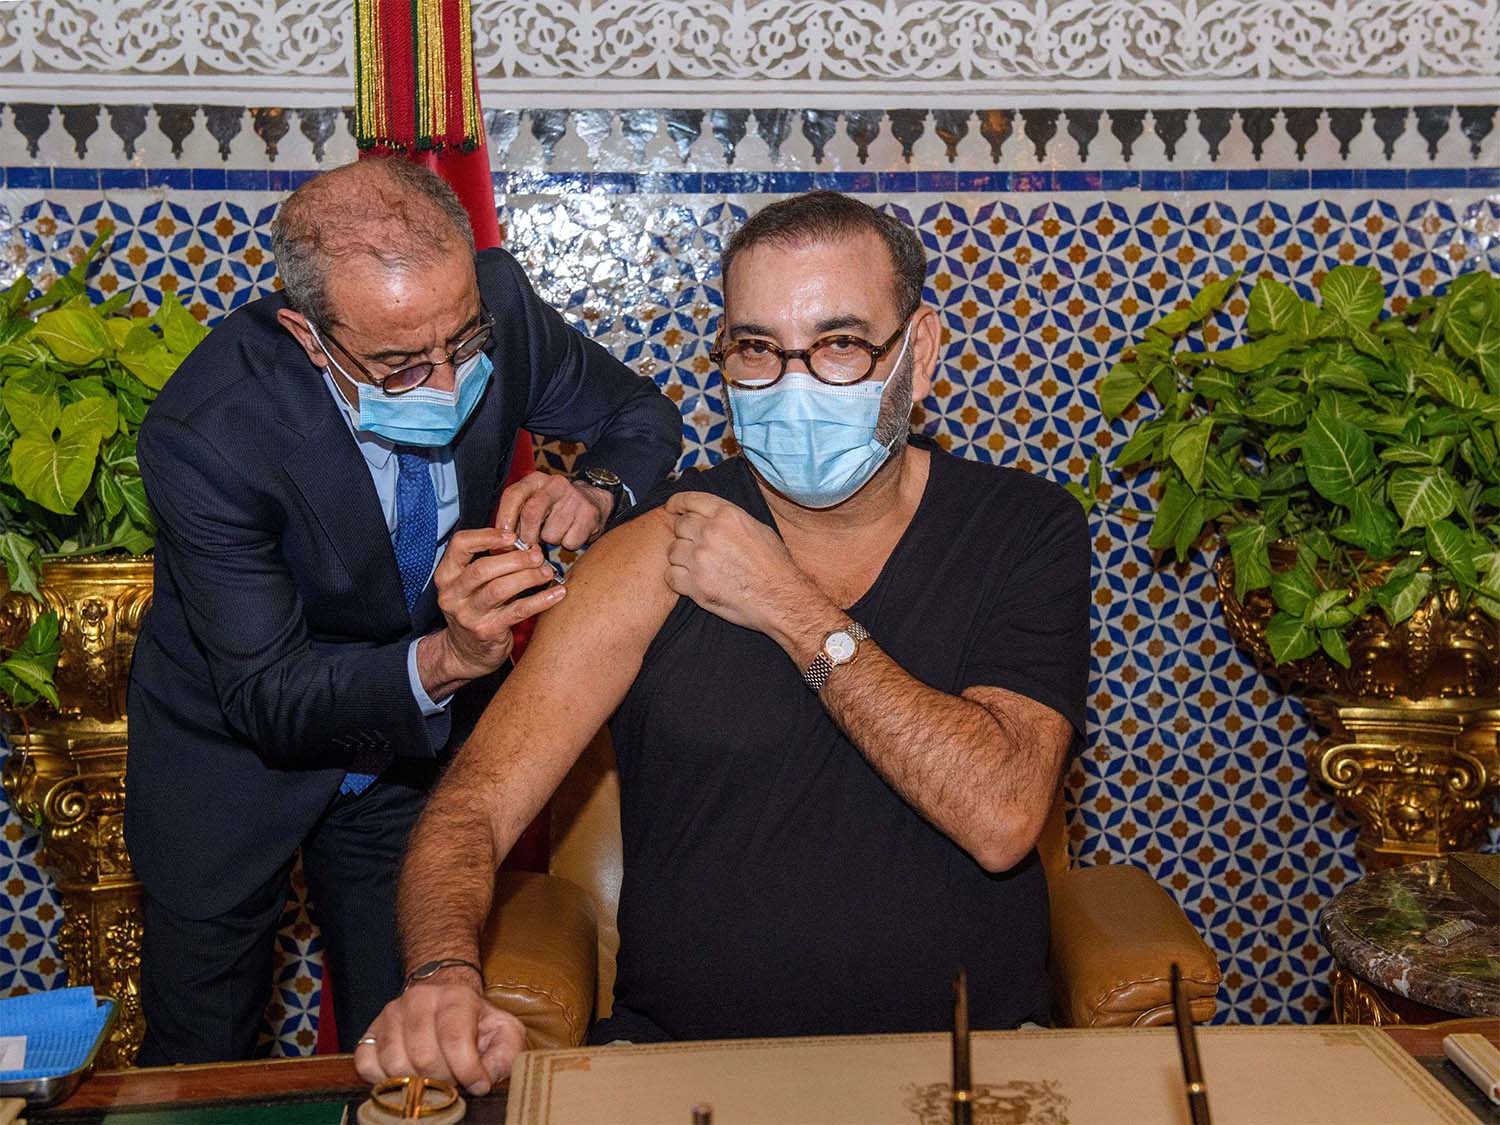 King Mohammed VI being inoculated against COVID-19